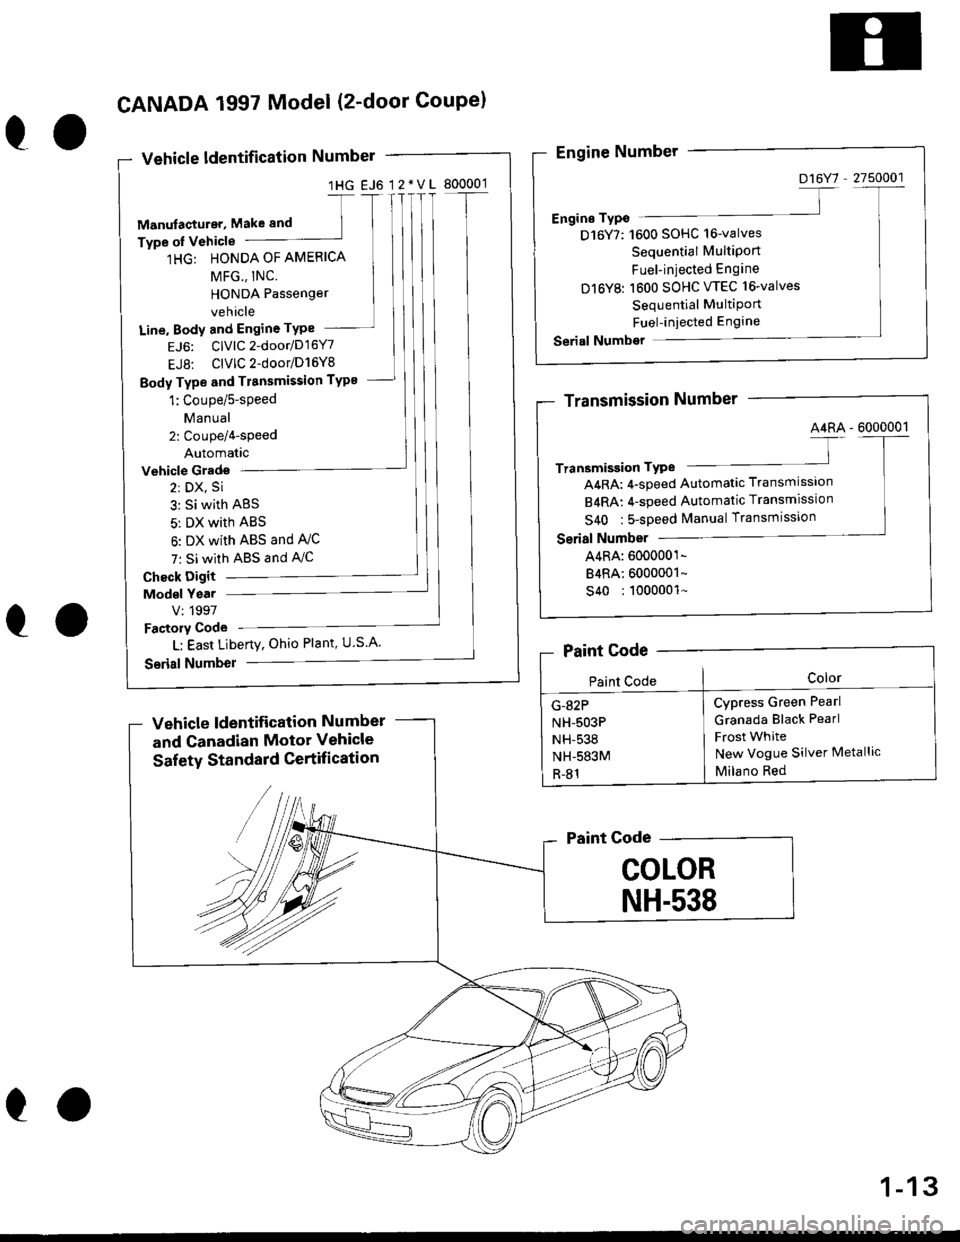 HONDA CIVIC 1998 6.G Workshop Manual 1HG EJ6 12*VL 800001
1HG: HONDA OF AMERICA
Line, Body and Engine TYPe
EJ6: ClvlC2-door/D16Y7
EJ8: ClVlC2-door/D16Y8
Body Type and Tr8nsmission TYP8
Vehicle Grado
2: DX, Si
3: Si with ABS
5: DX with AB